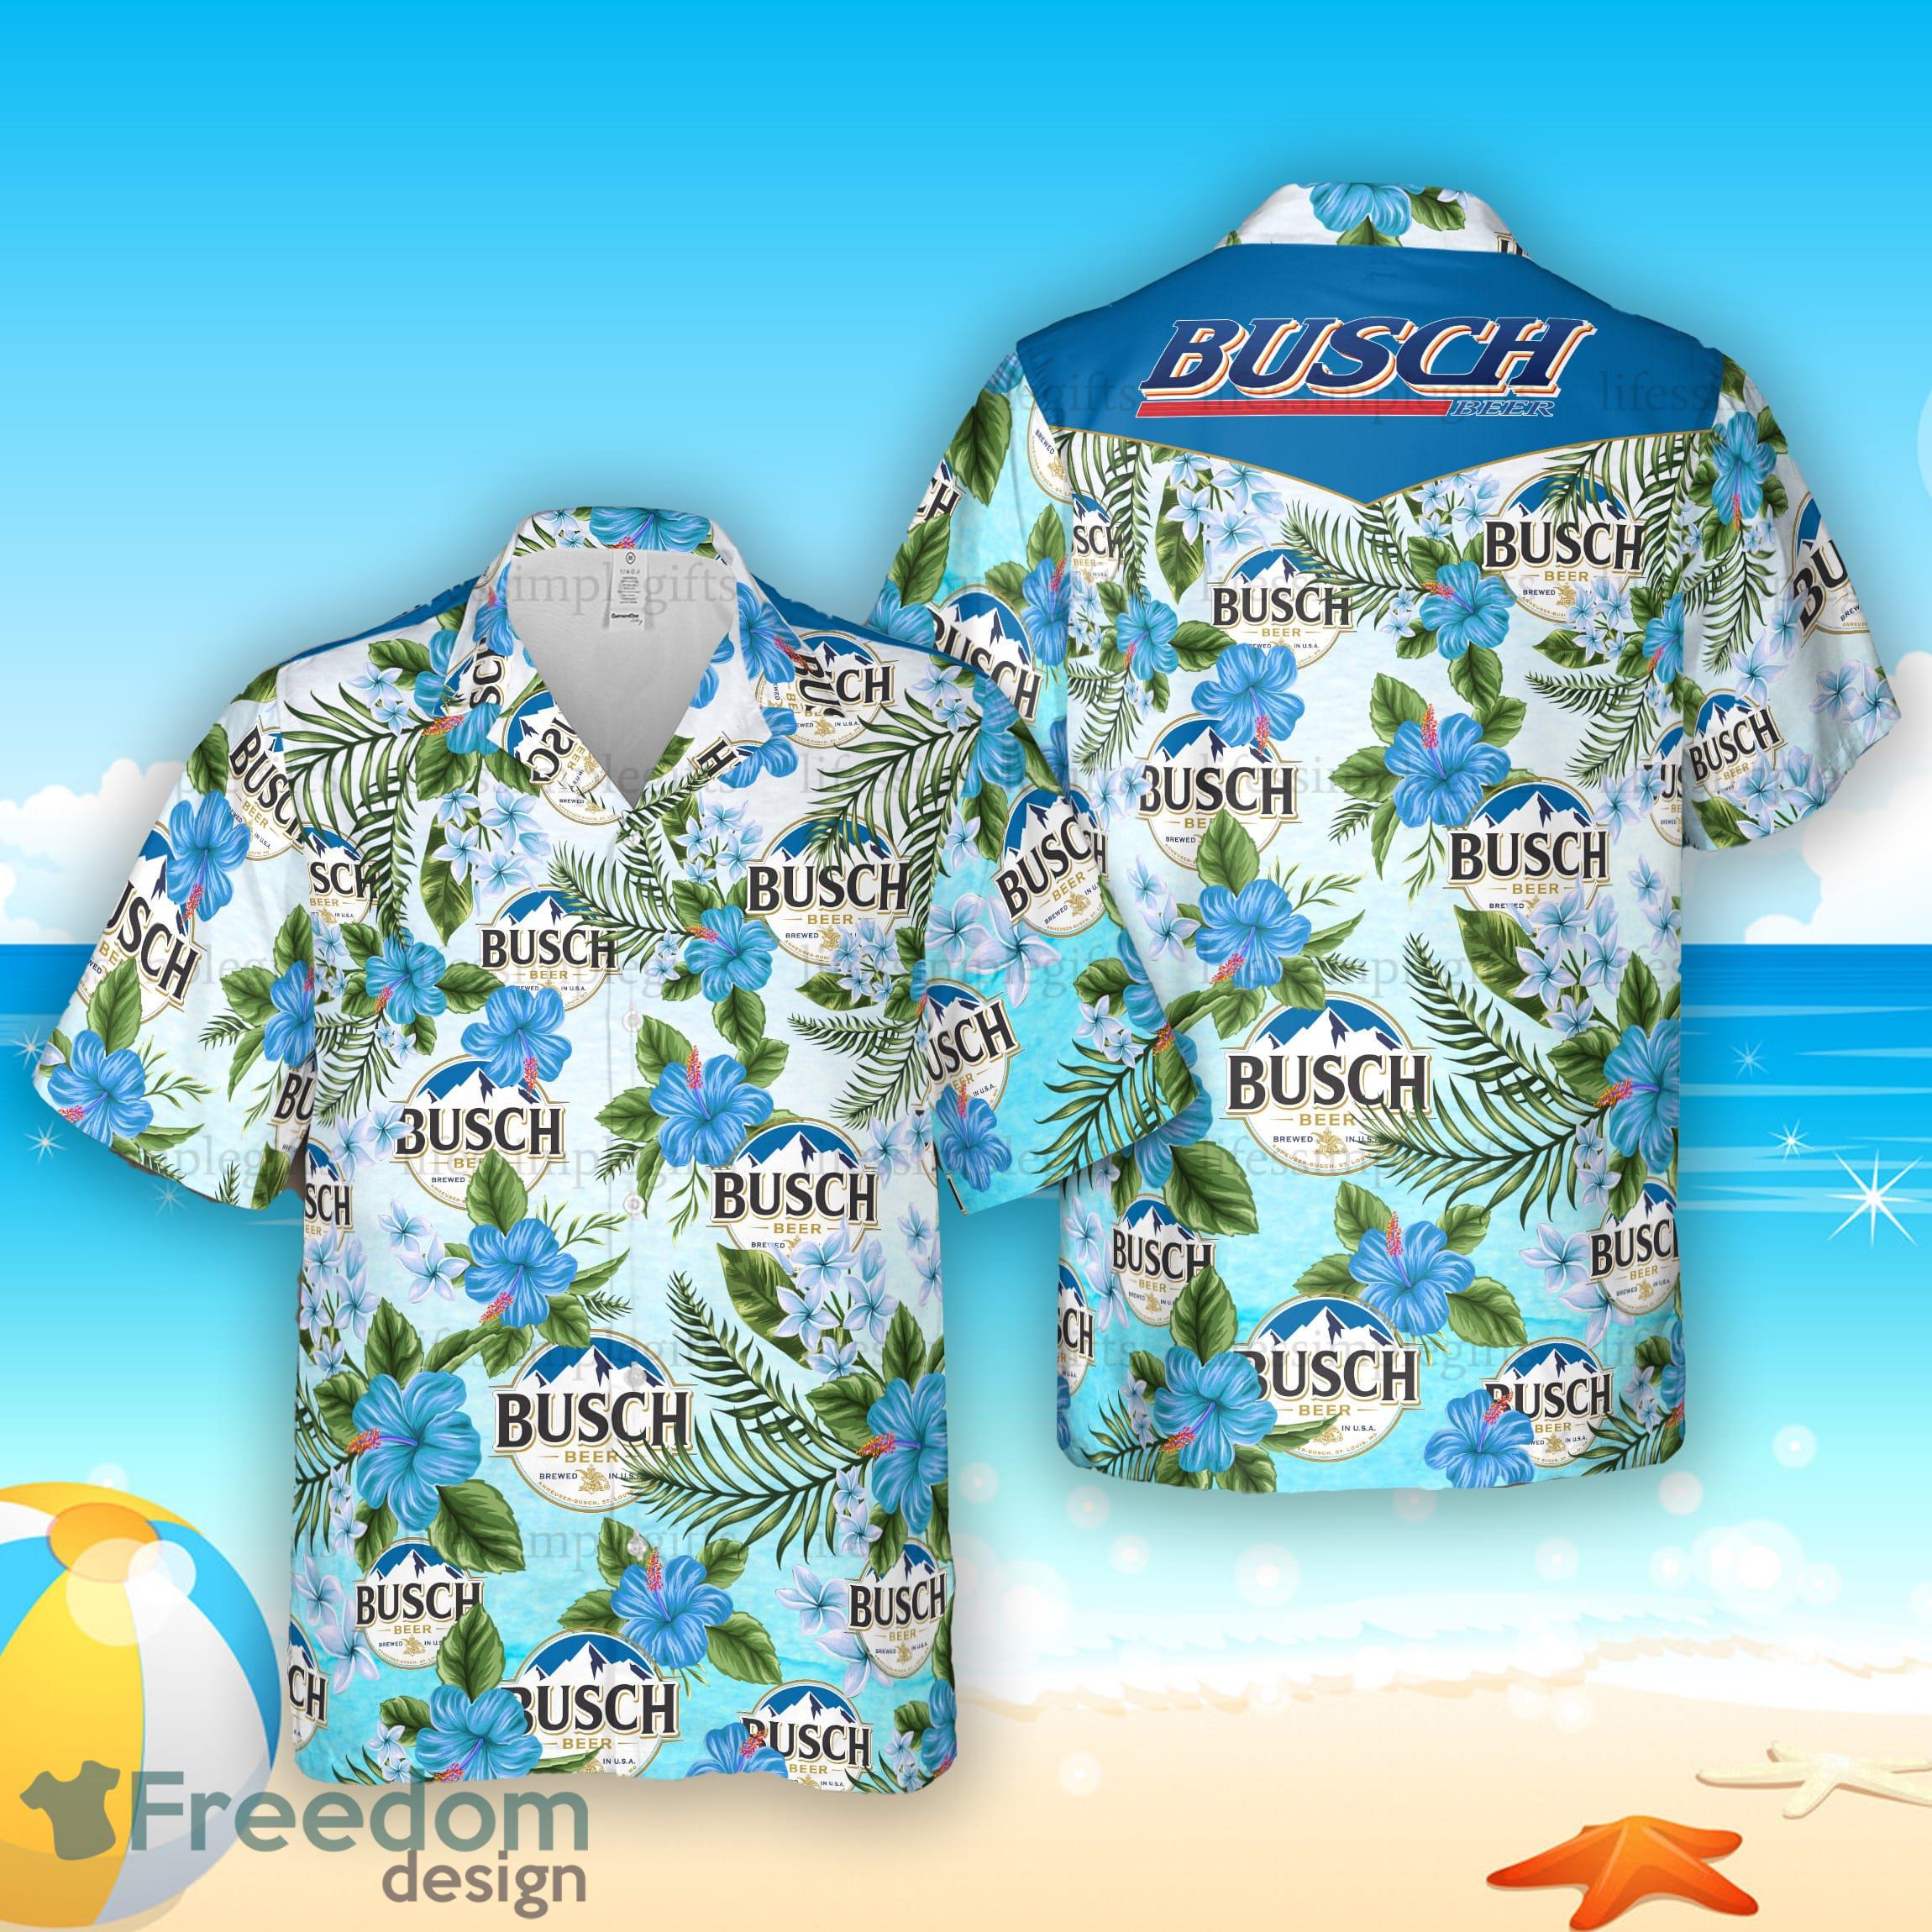 Brad Pitt Cliff Booth In Once Up On A Time Summer Gift Hawaiian